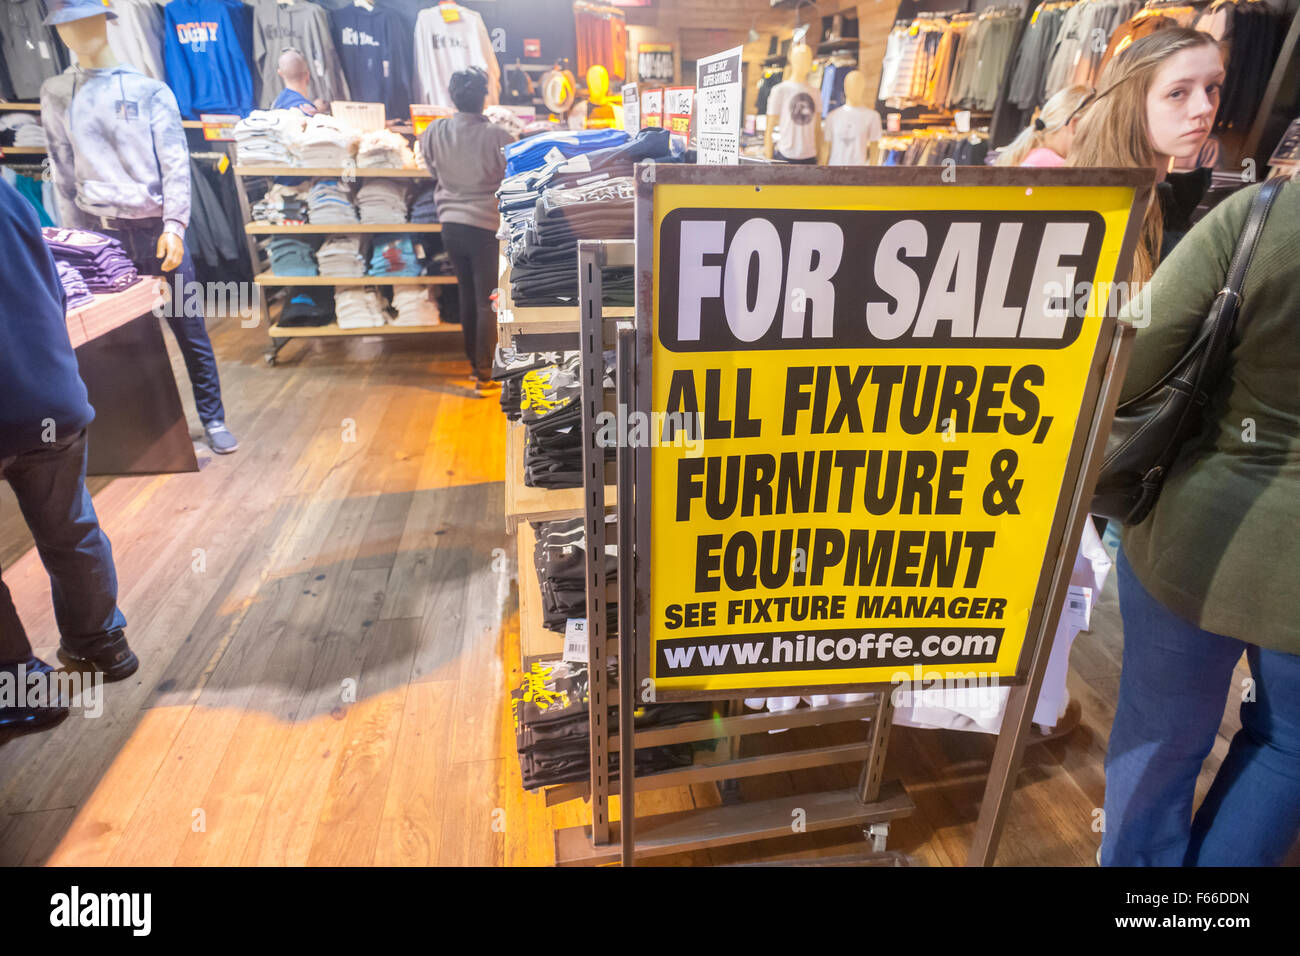 Big discounts on merchandise and fixtures are advertised in the Quicksilver store in Times Square in New York on Sunday, November 8, 2015. Quicksilver after filing for Chapter 11 bankruptcy protection will be closing 27 out of 122 stores in the U.S. This includes their Roxy and DC brands. The company is affected by the mass exodus of teens, their core customers, who are spending their money on electronics rather than clothing. The same problem effects other teen retailers such as Abercrombie & Fitch and Aeropostale.  (© Richard B. Levine) Stock Photo